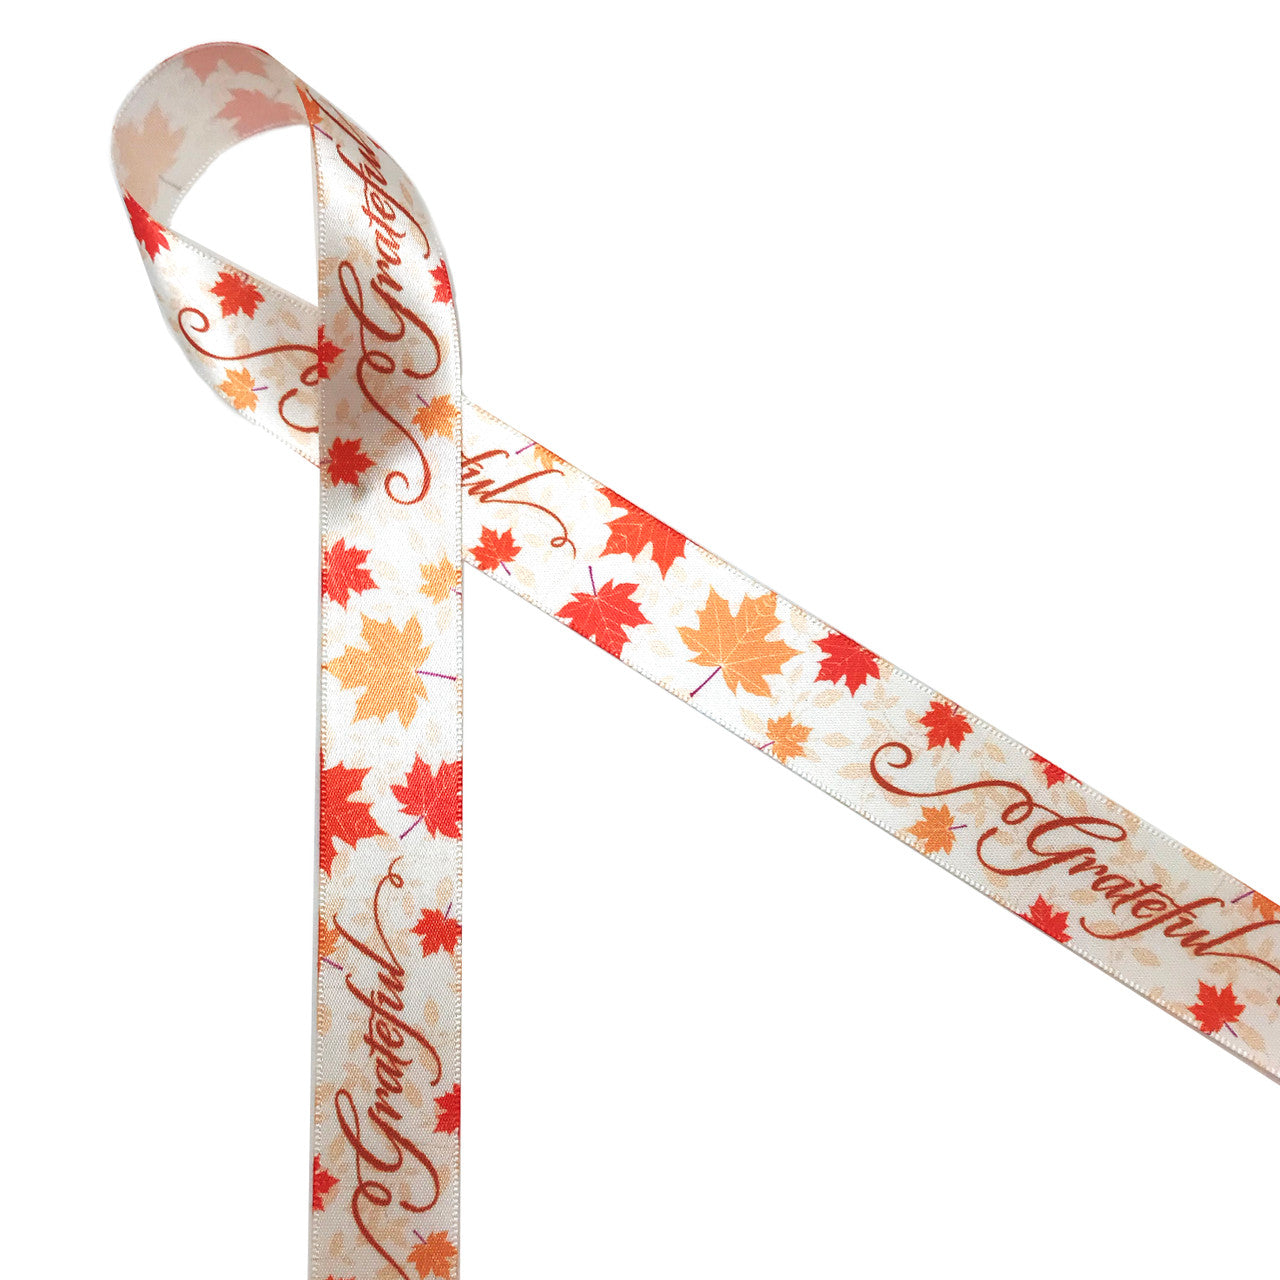 Grateful in a rust curly font with tossed Fall leaves of orange and gold printed on 7/8" antique white single face satin ribbon is an ideal ribbon for Thanksgiving gifts, table decor, wreaths and floral pieces. Be sure to have this ribbon on hand for your Thanksgiving needs. Our ribbon is designed and printed in the USA